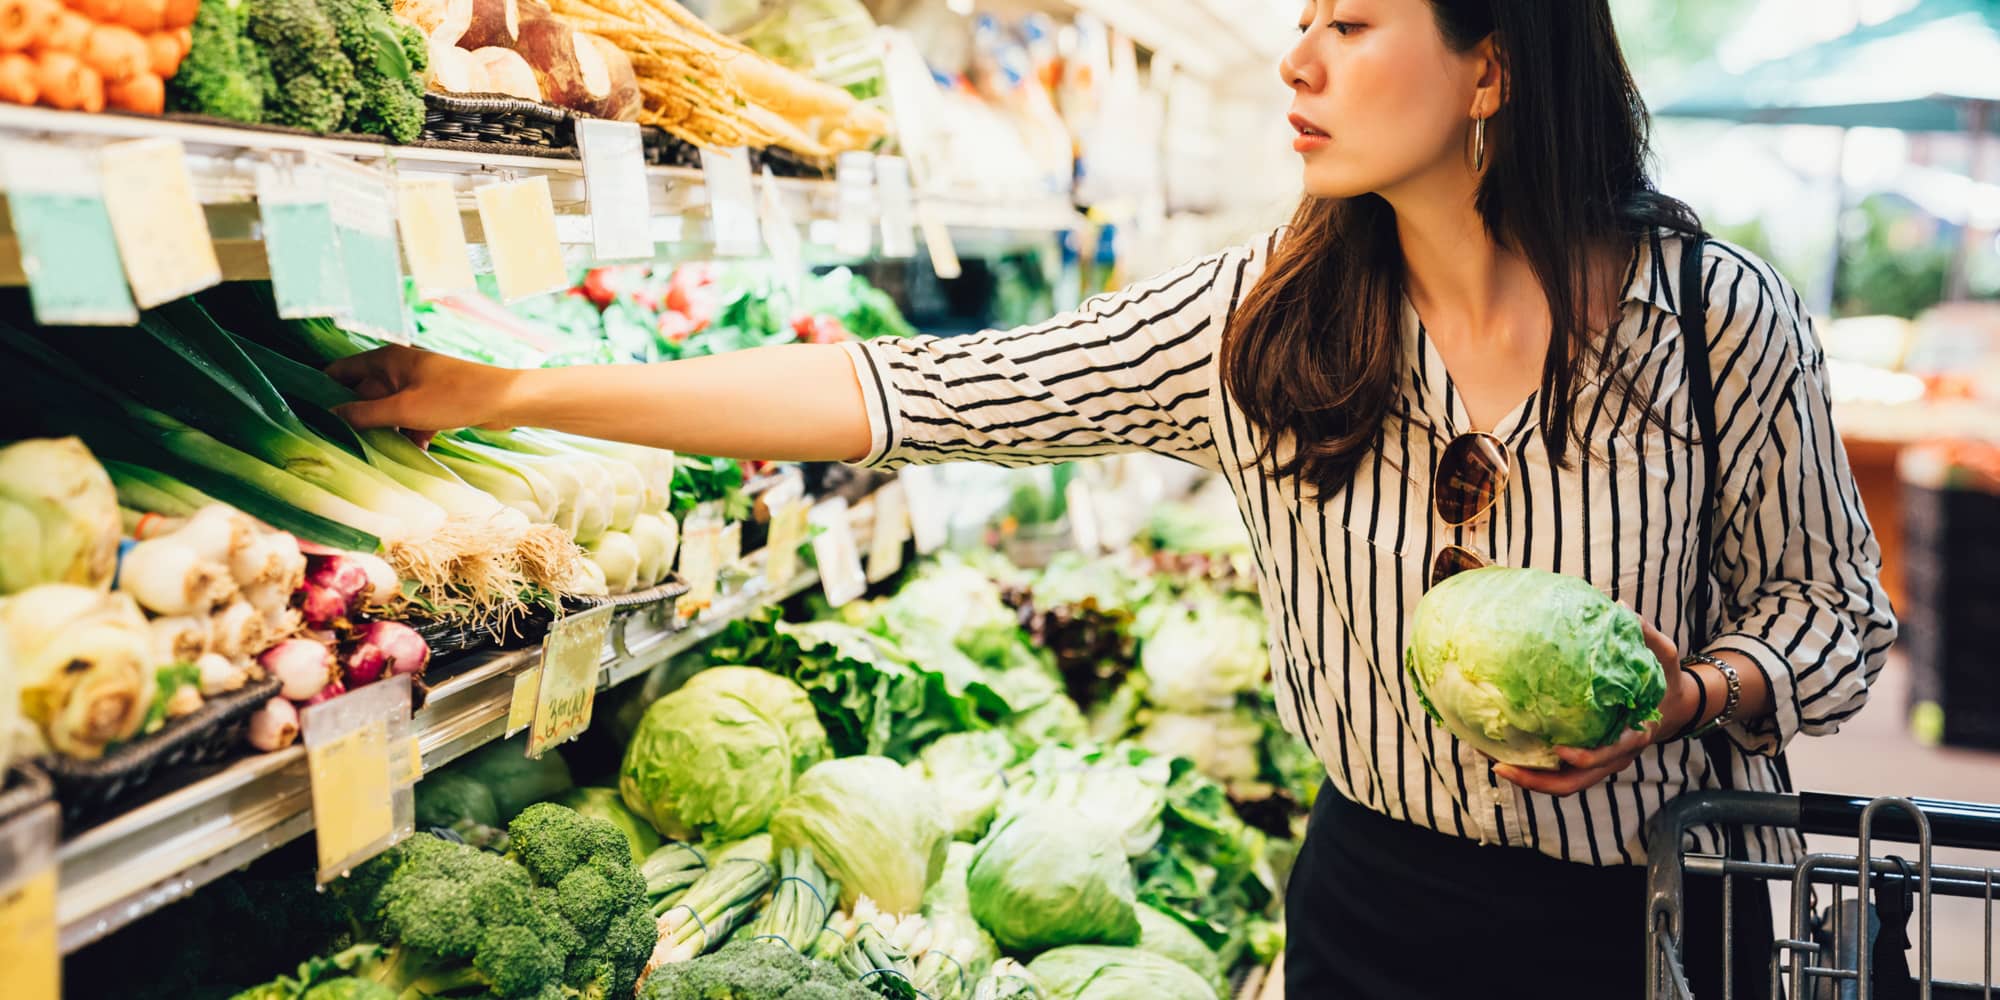 Why do grocery retailers find on-shelf availability such a challenge?